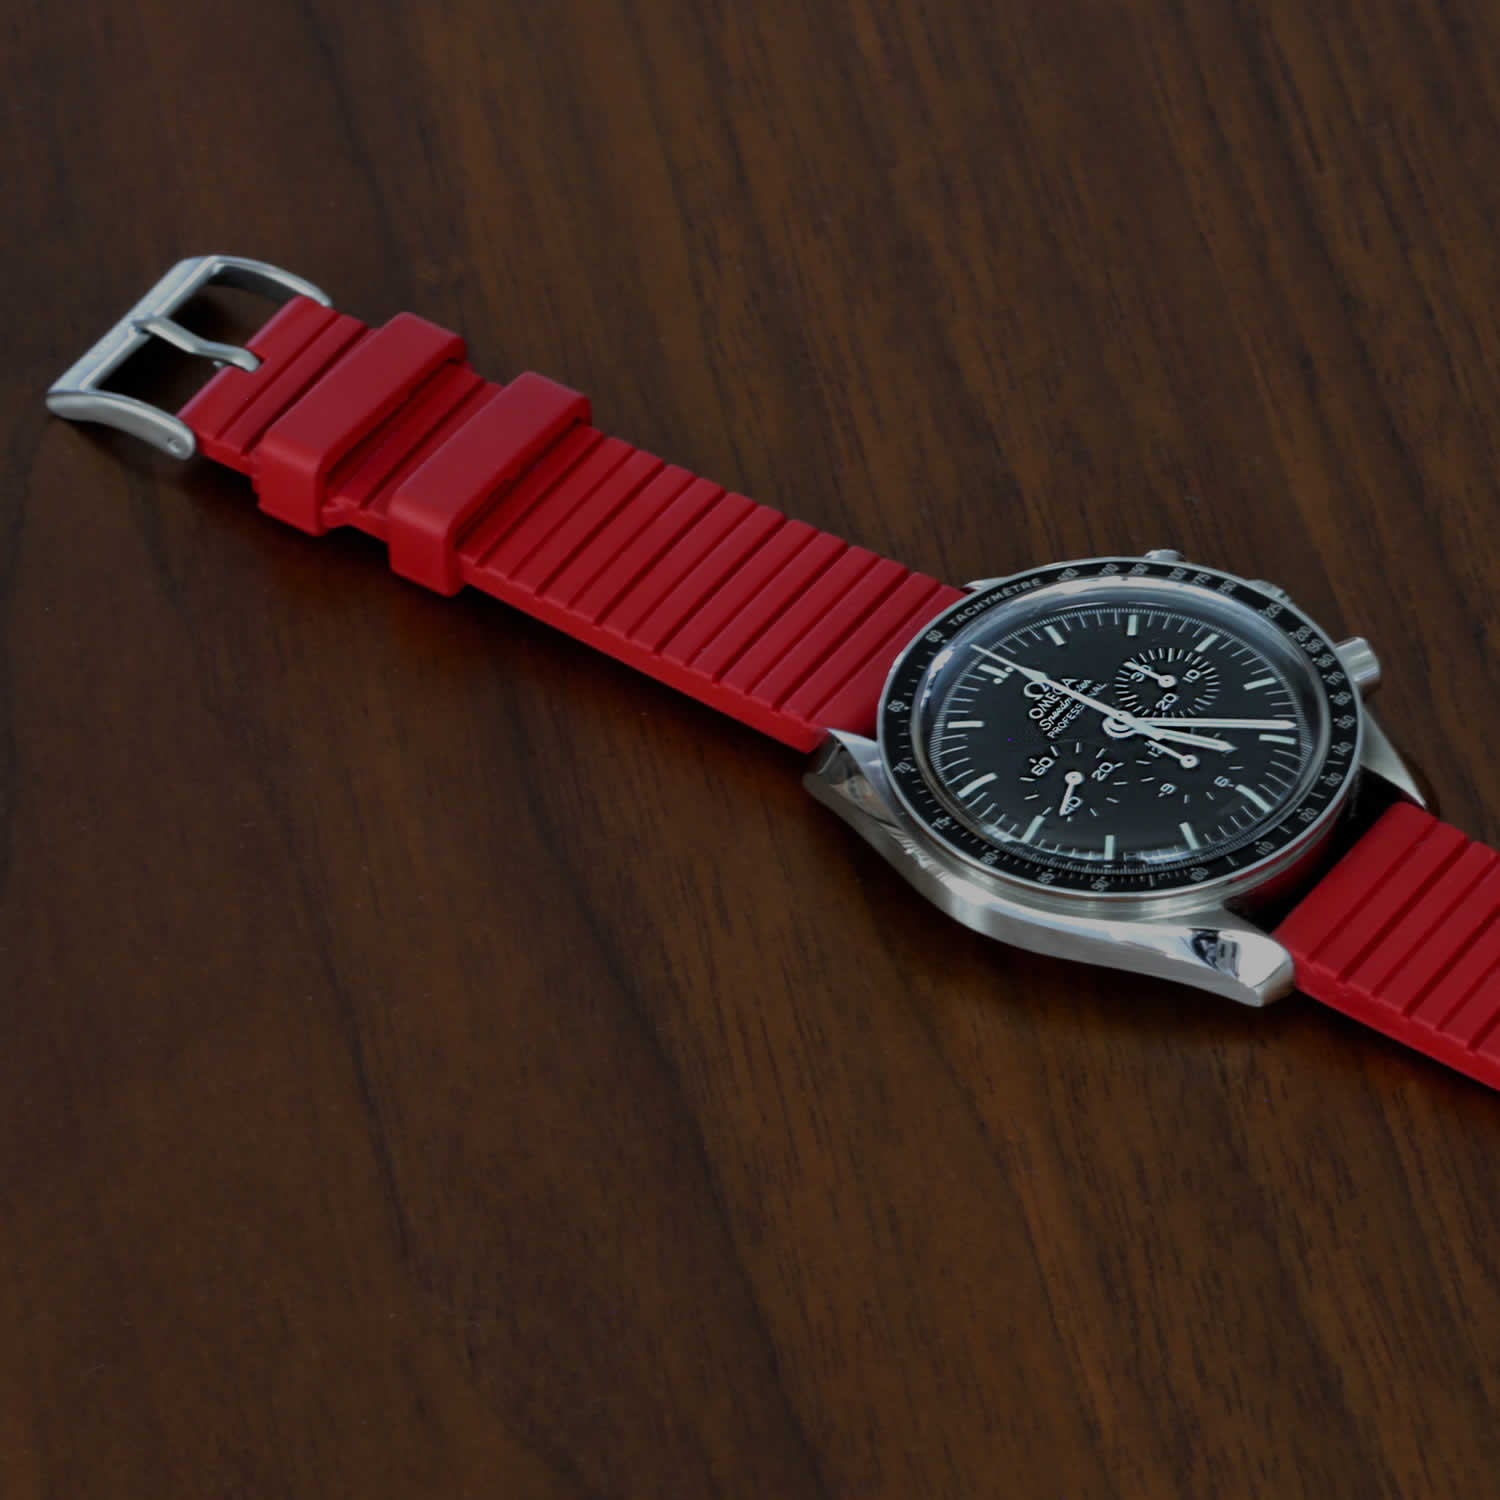 red rubber fkm watch band on an omega speedmaster pro watch